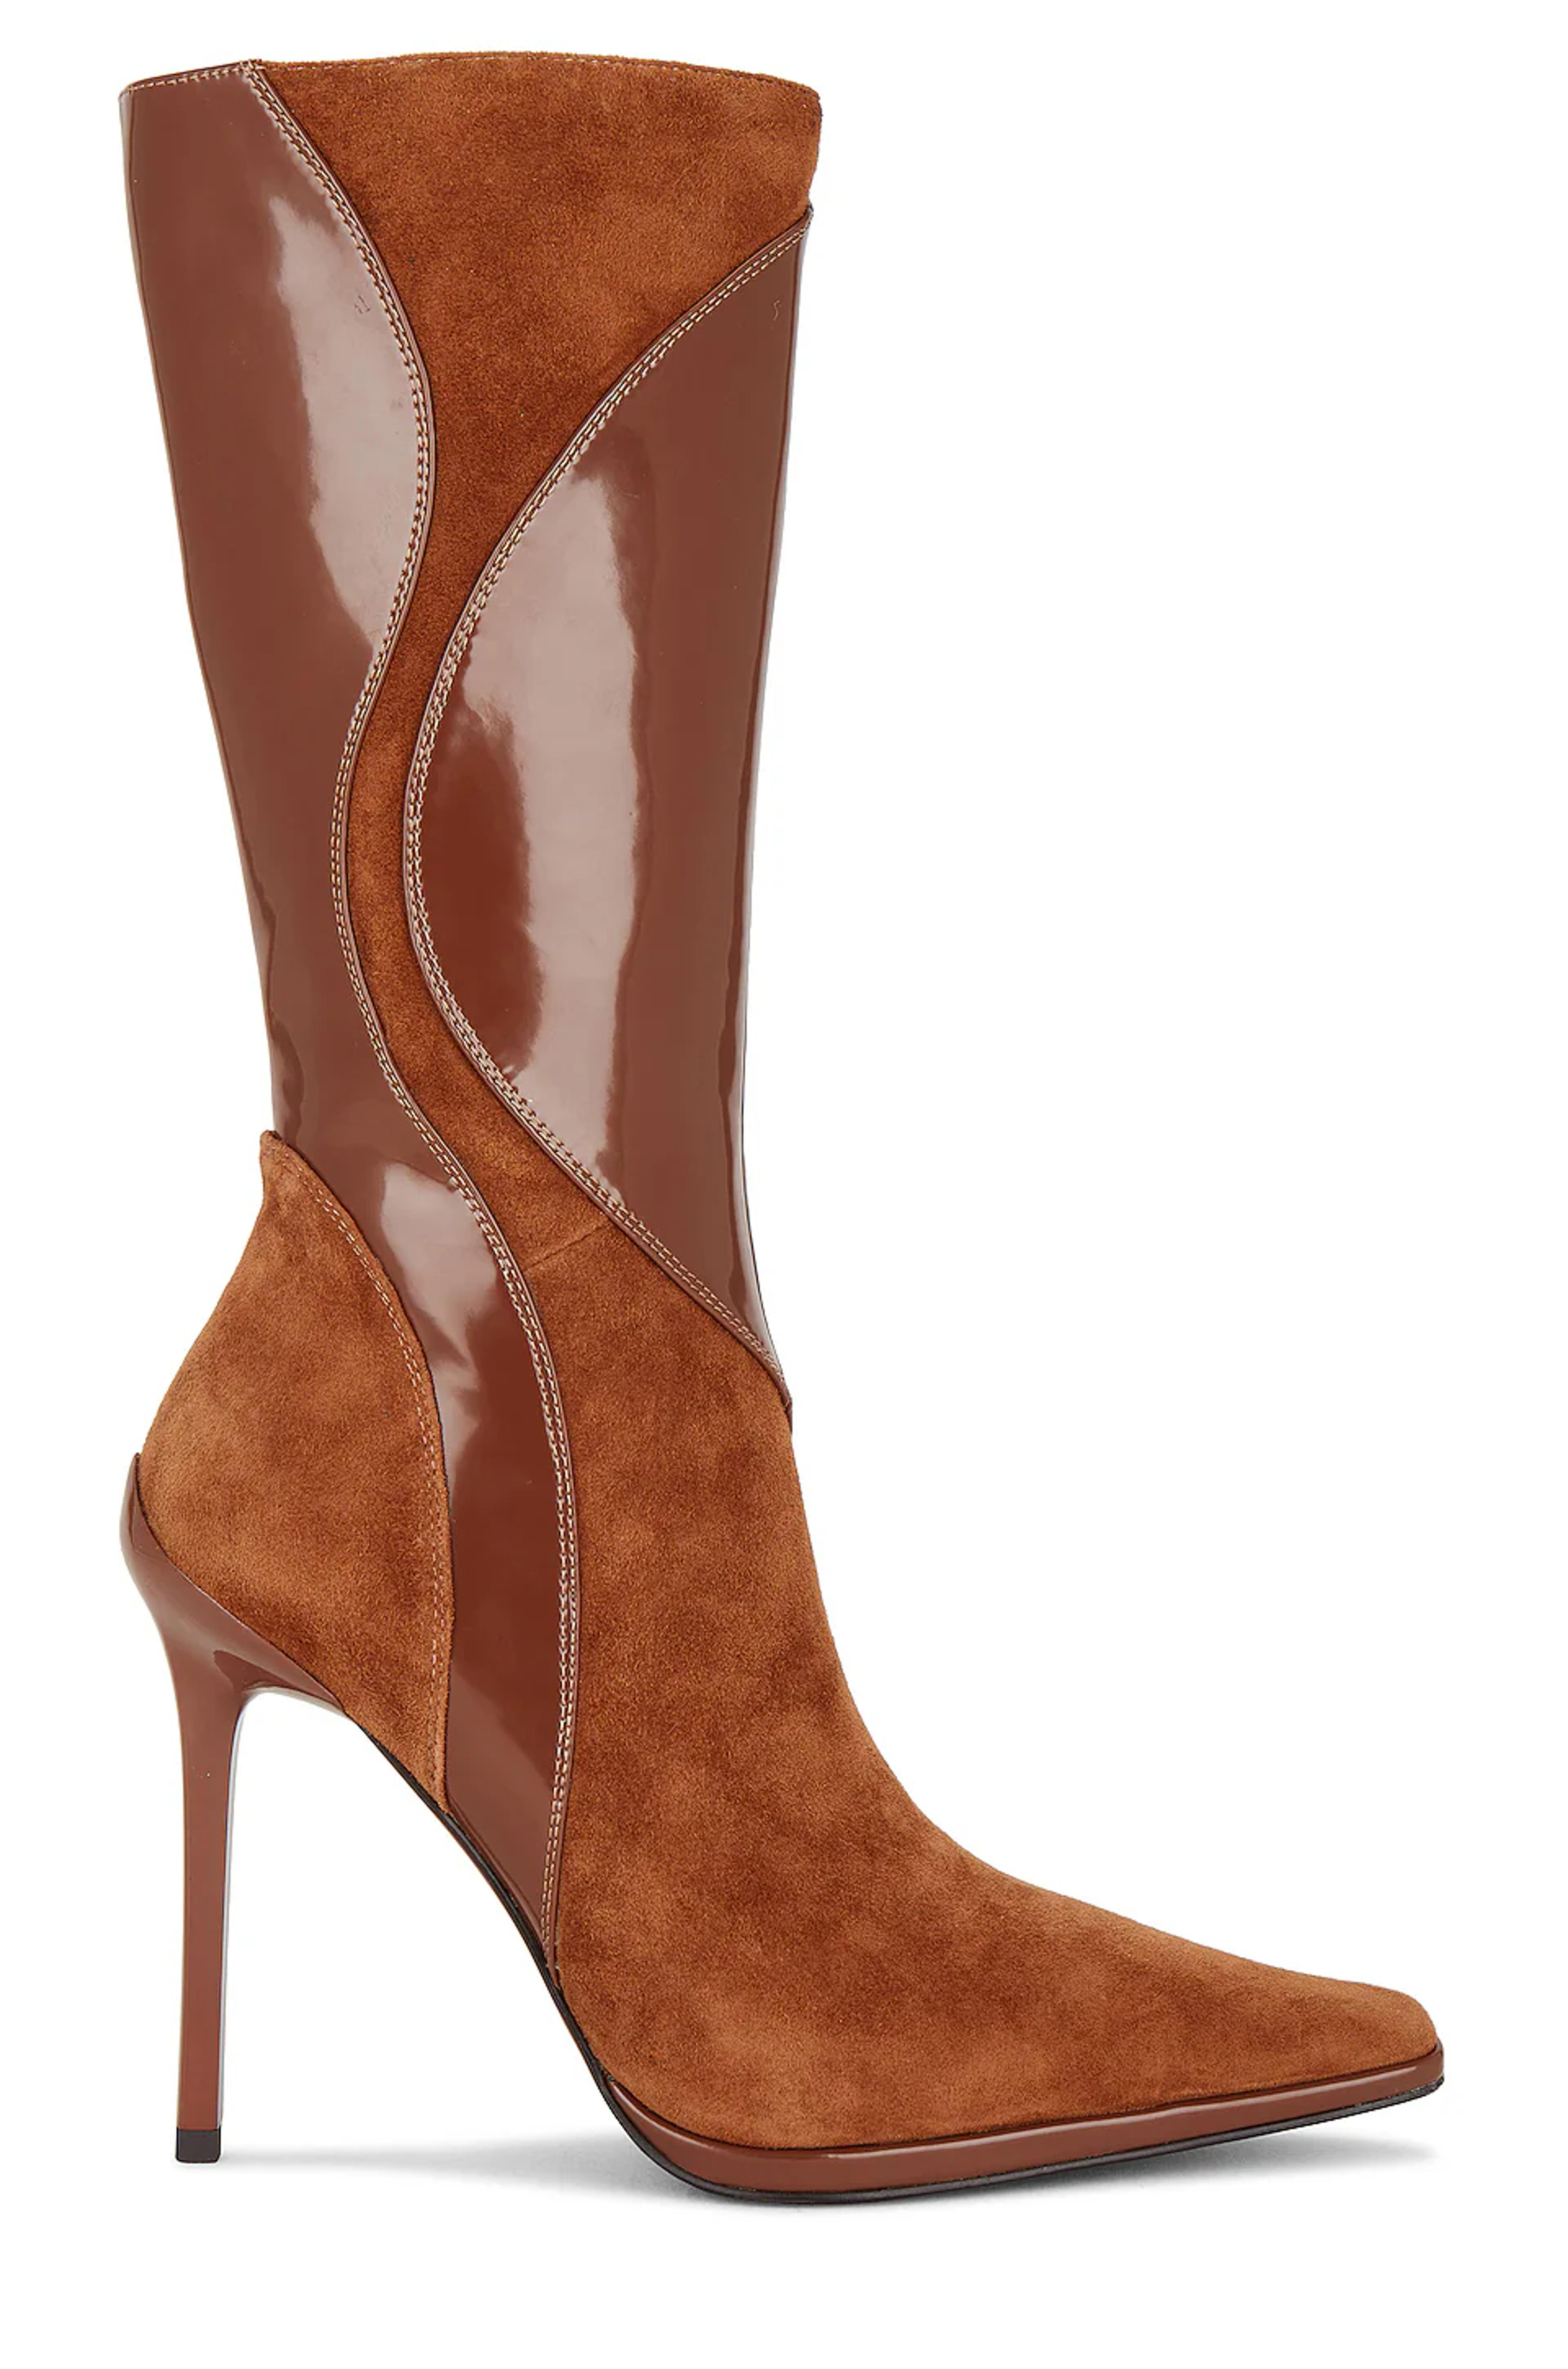 Jeffrey Campbell Scylla Boot in Brown Suede Combo | REVOLVE